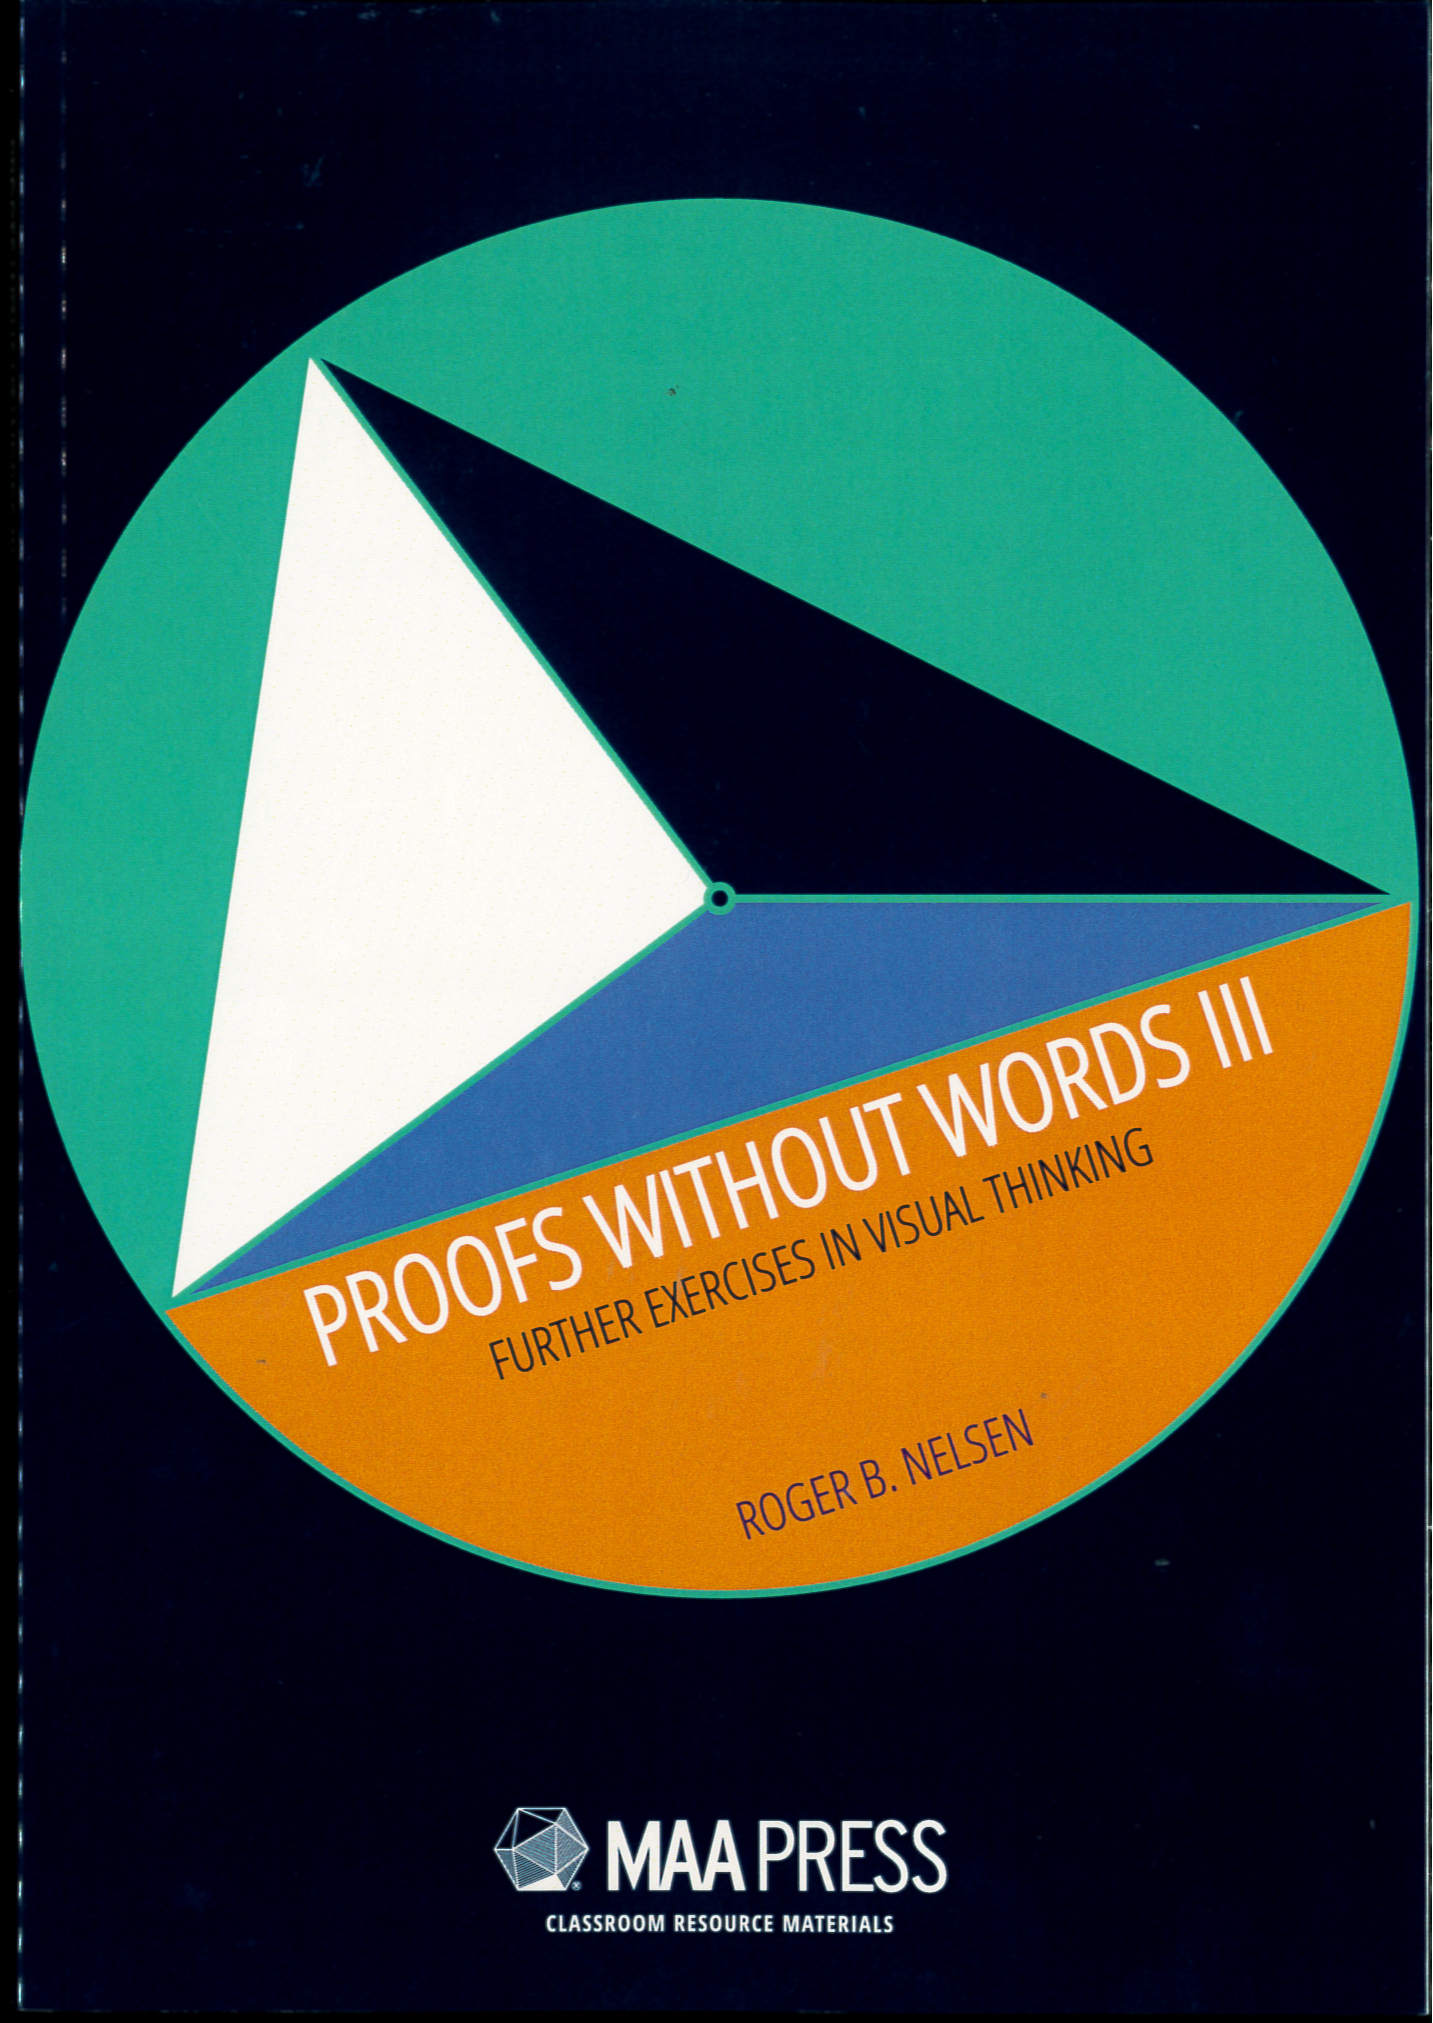 Proofs Without Words III : Further Exercises in Visual Thinking. /